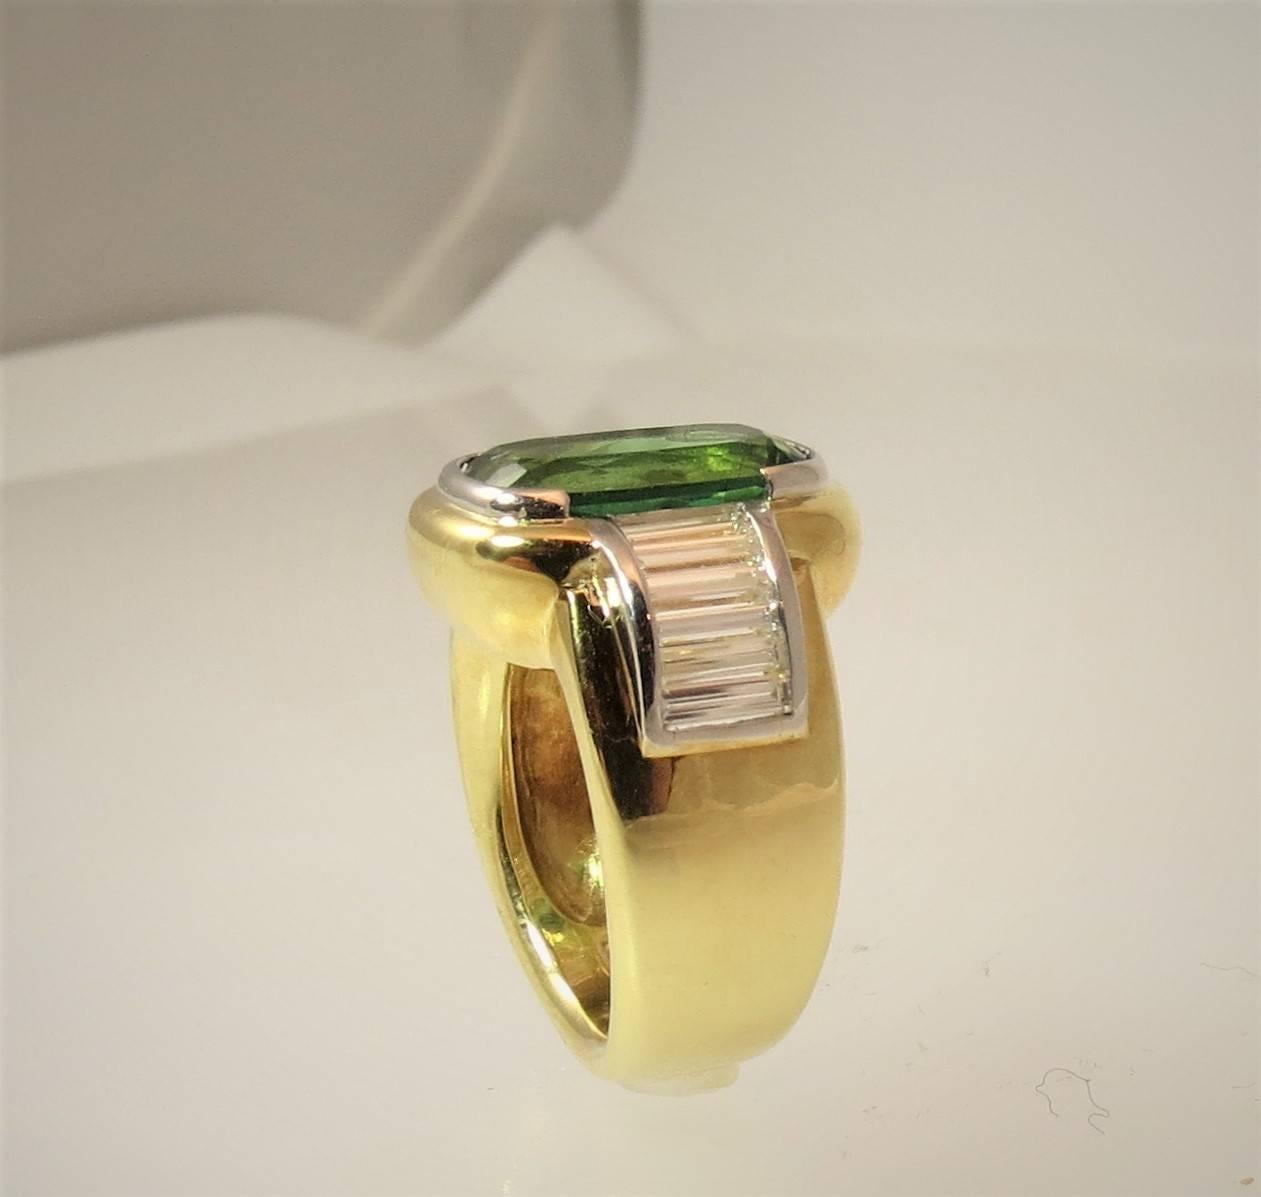  Green Tourmaline  Diamond Ring by Susan Berman In Excellent Condition For Sale In Chicago, IL